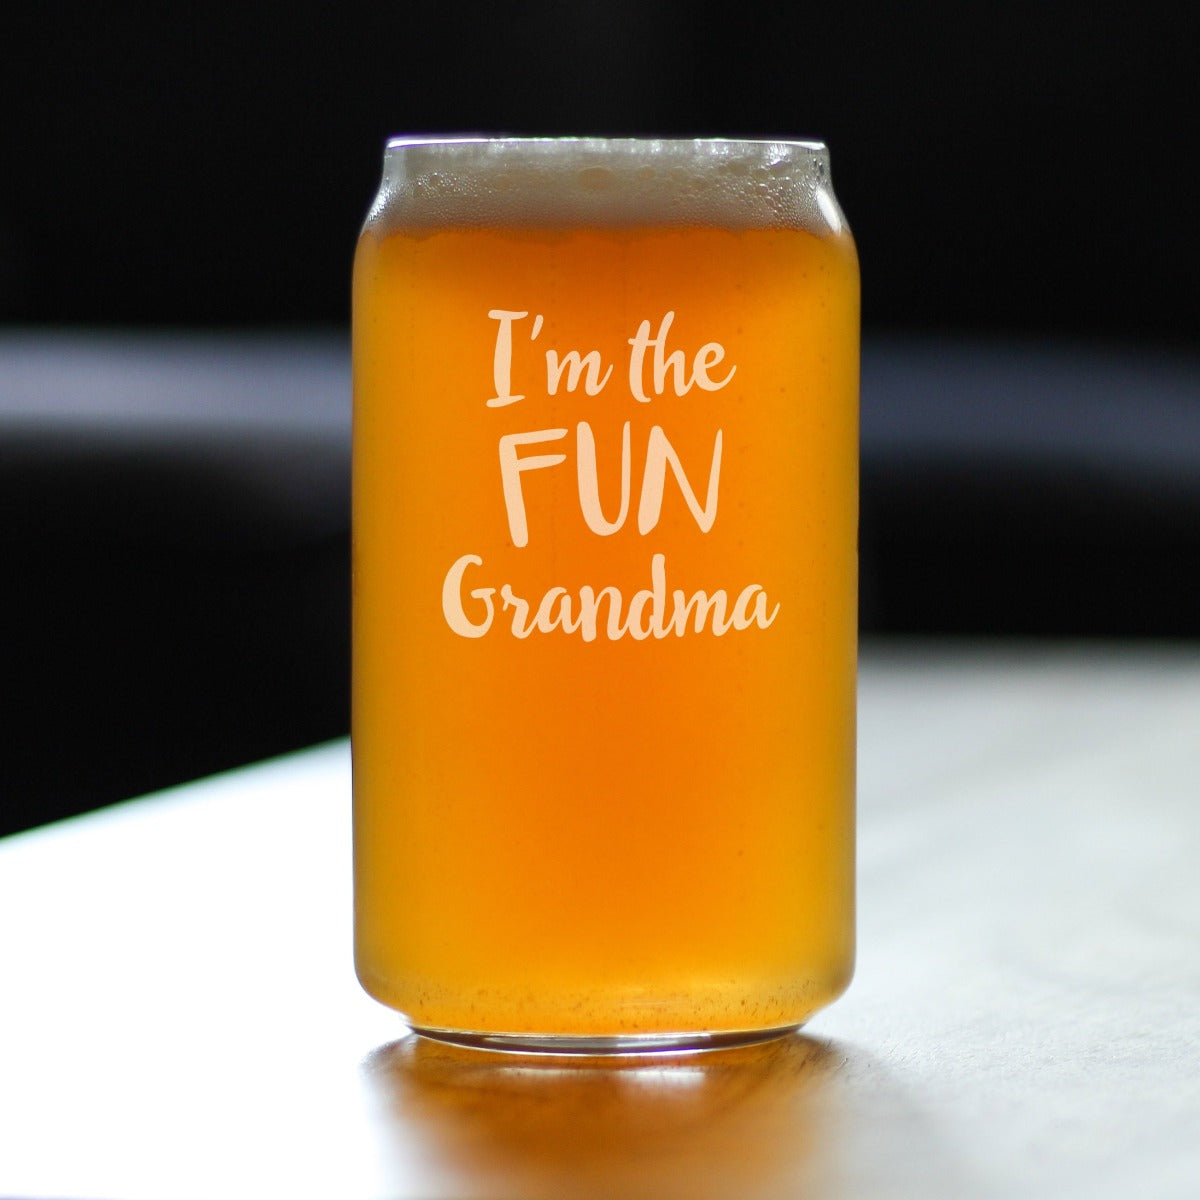 Fun Grandma - Funny Beer Can Pint Glass Gift for Grandmothers - Cute Engraved Glasses for Grandparents - 16 oz